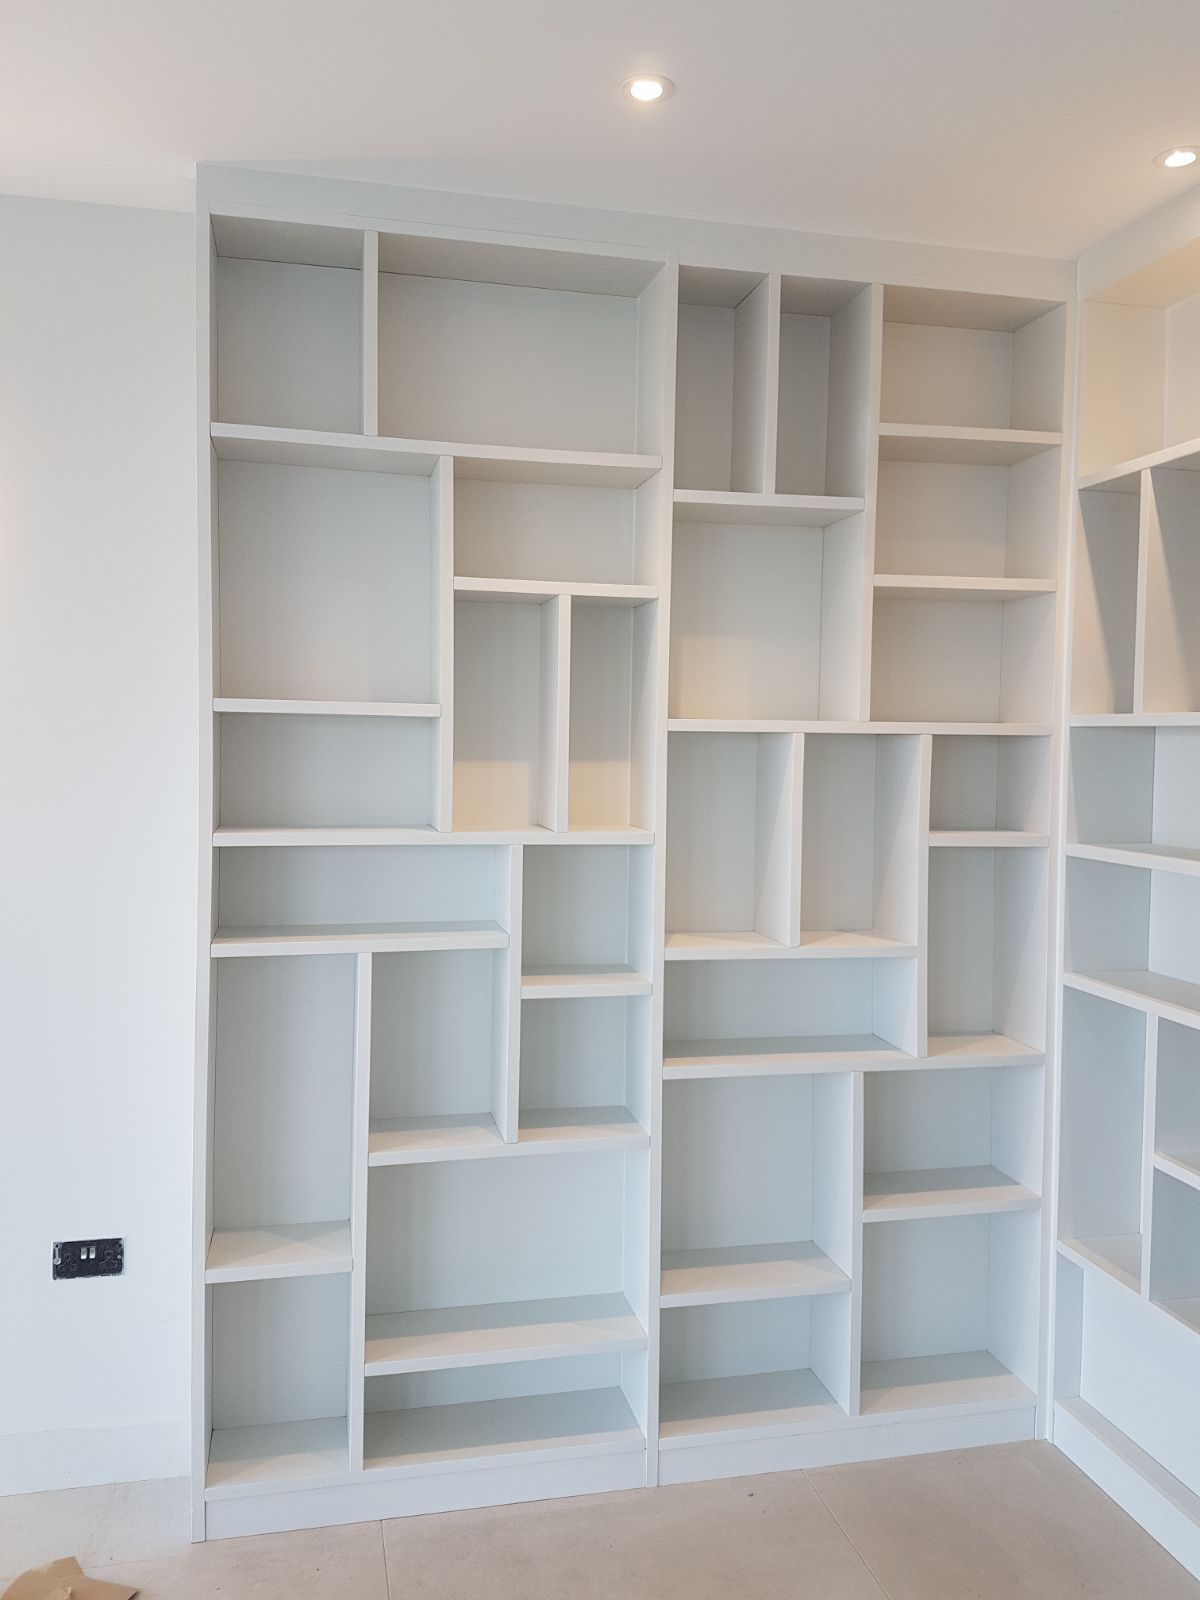 25mm Thick Chunky Shelving Unit Built In Furniture throughout sizing 1200 X 1600